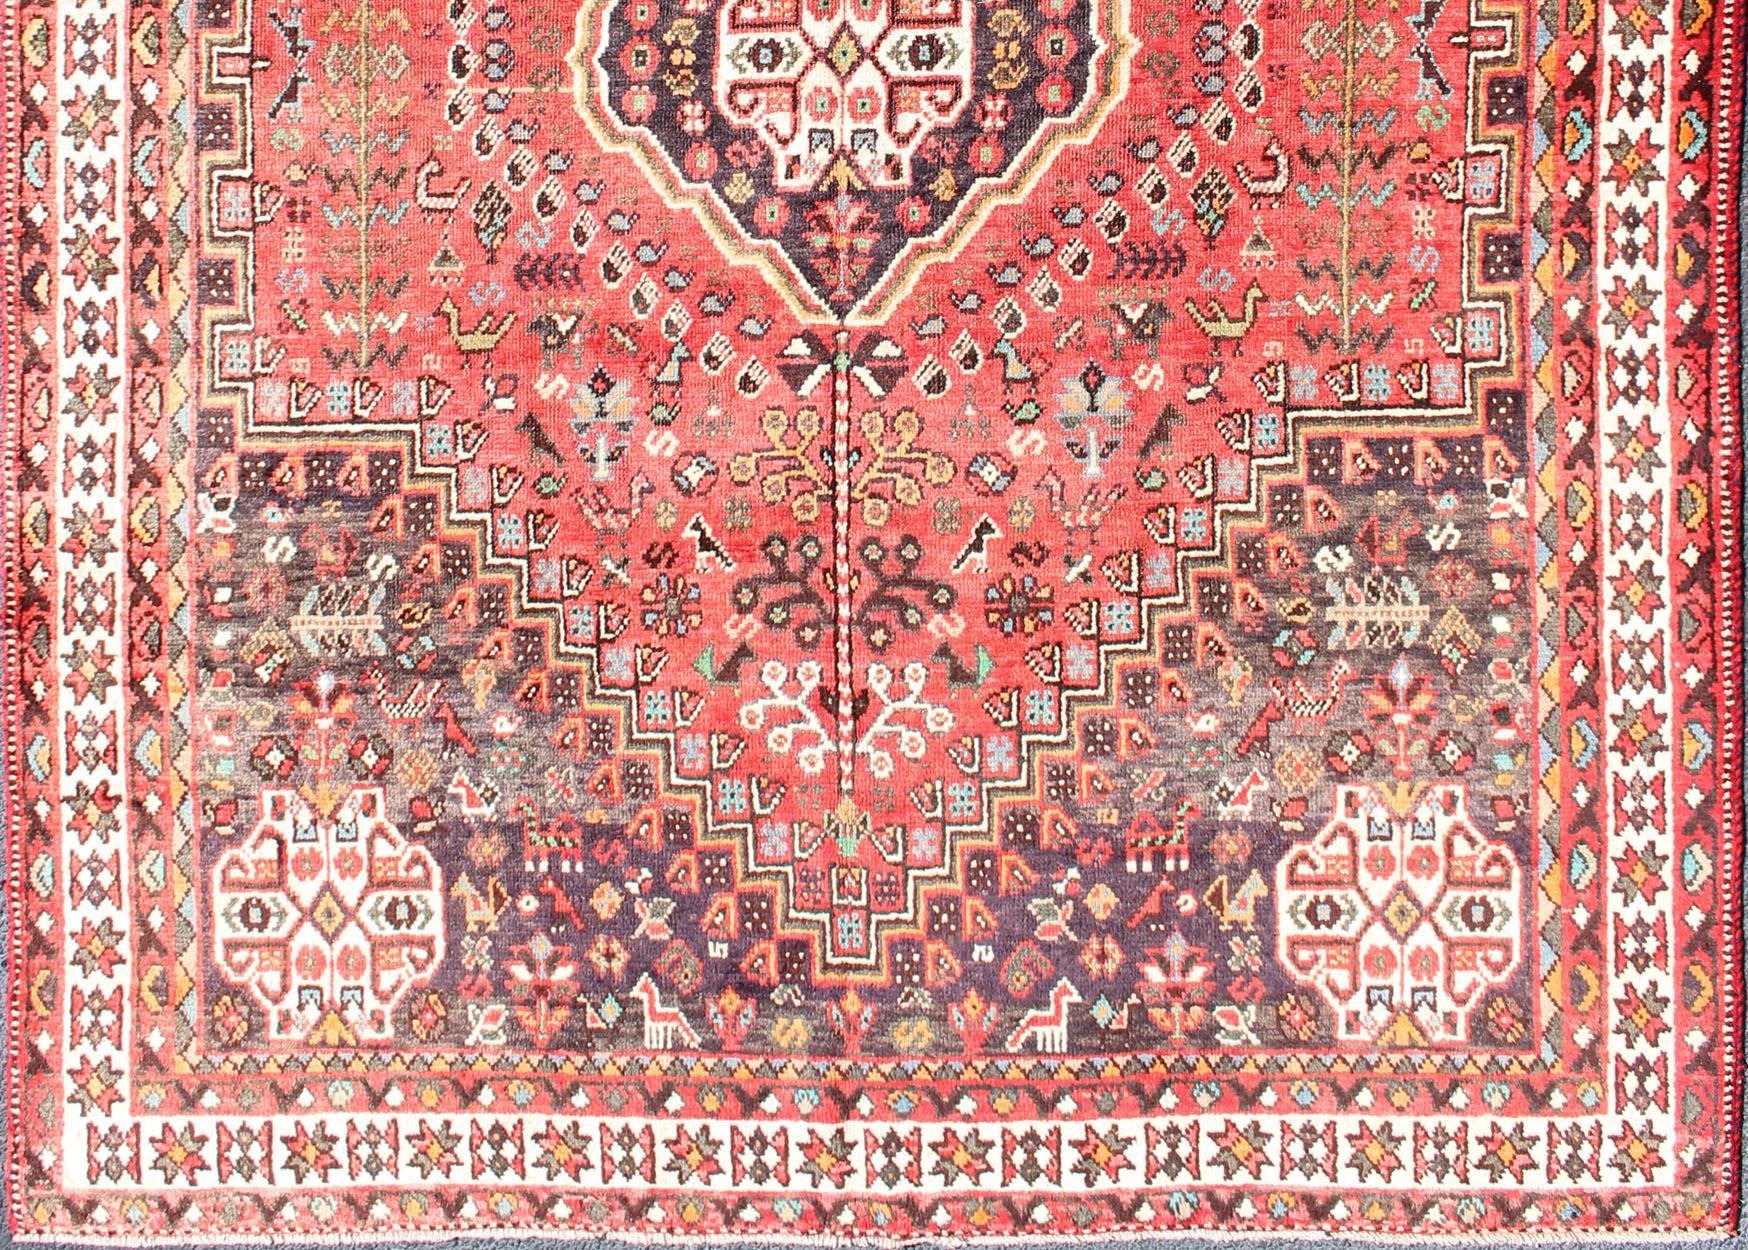 Persian Shiraz antique rug in brown and blue with Medallion geometric design, H20-0903 country of origin / type: Iran / Shiraz, circa 1950.

This vintage Persian Shiraz rug (circa mid-20th century) features a unique blend of colors and an